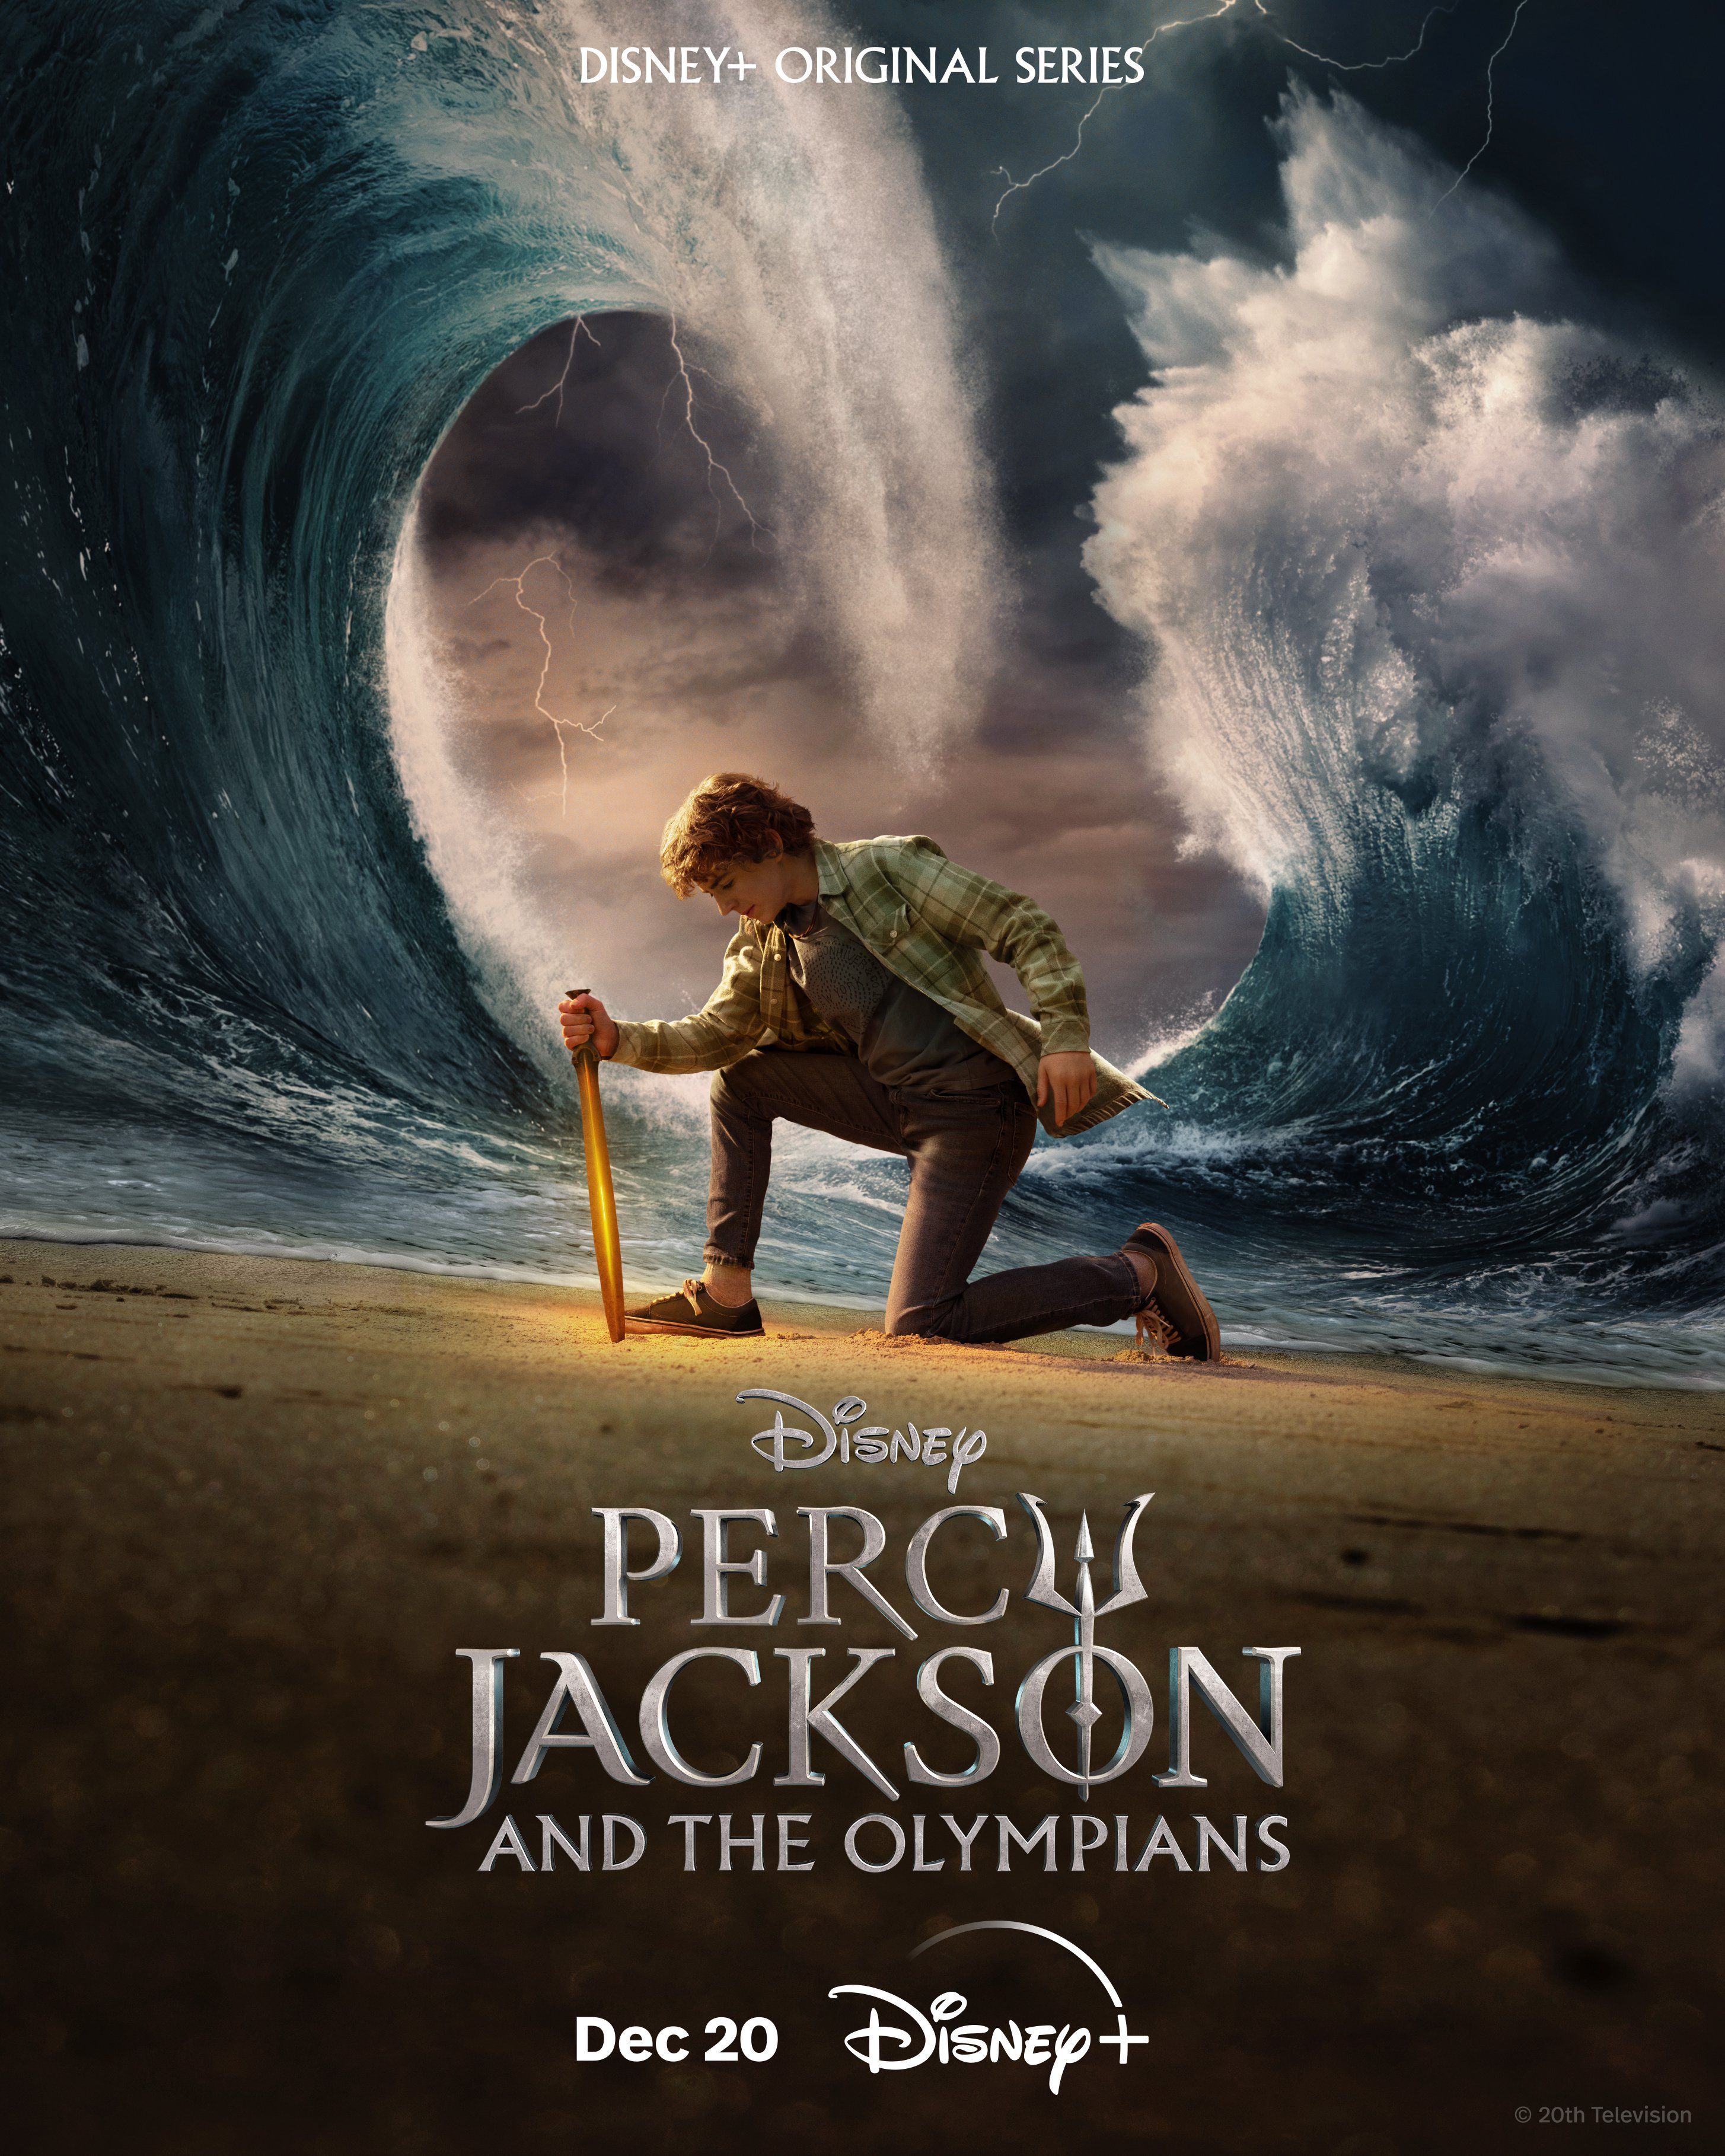 Walker Scobell controls the ocean as Percy Jackson in new poster for Percy Jackson and the Olympians